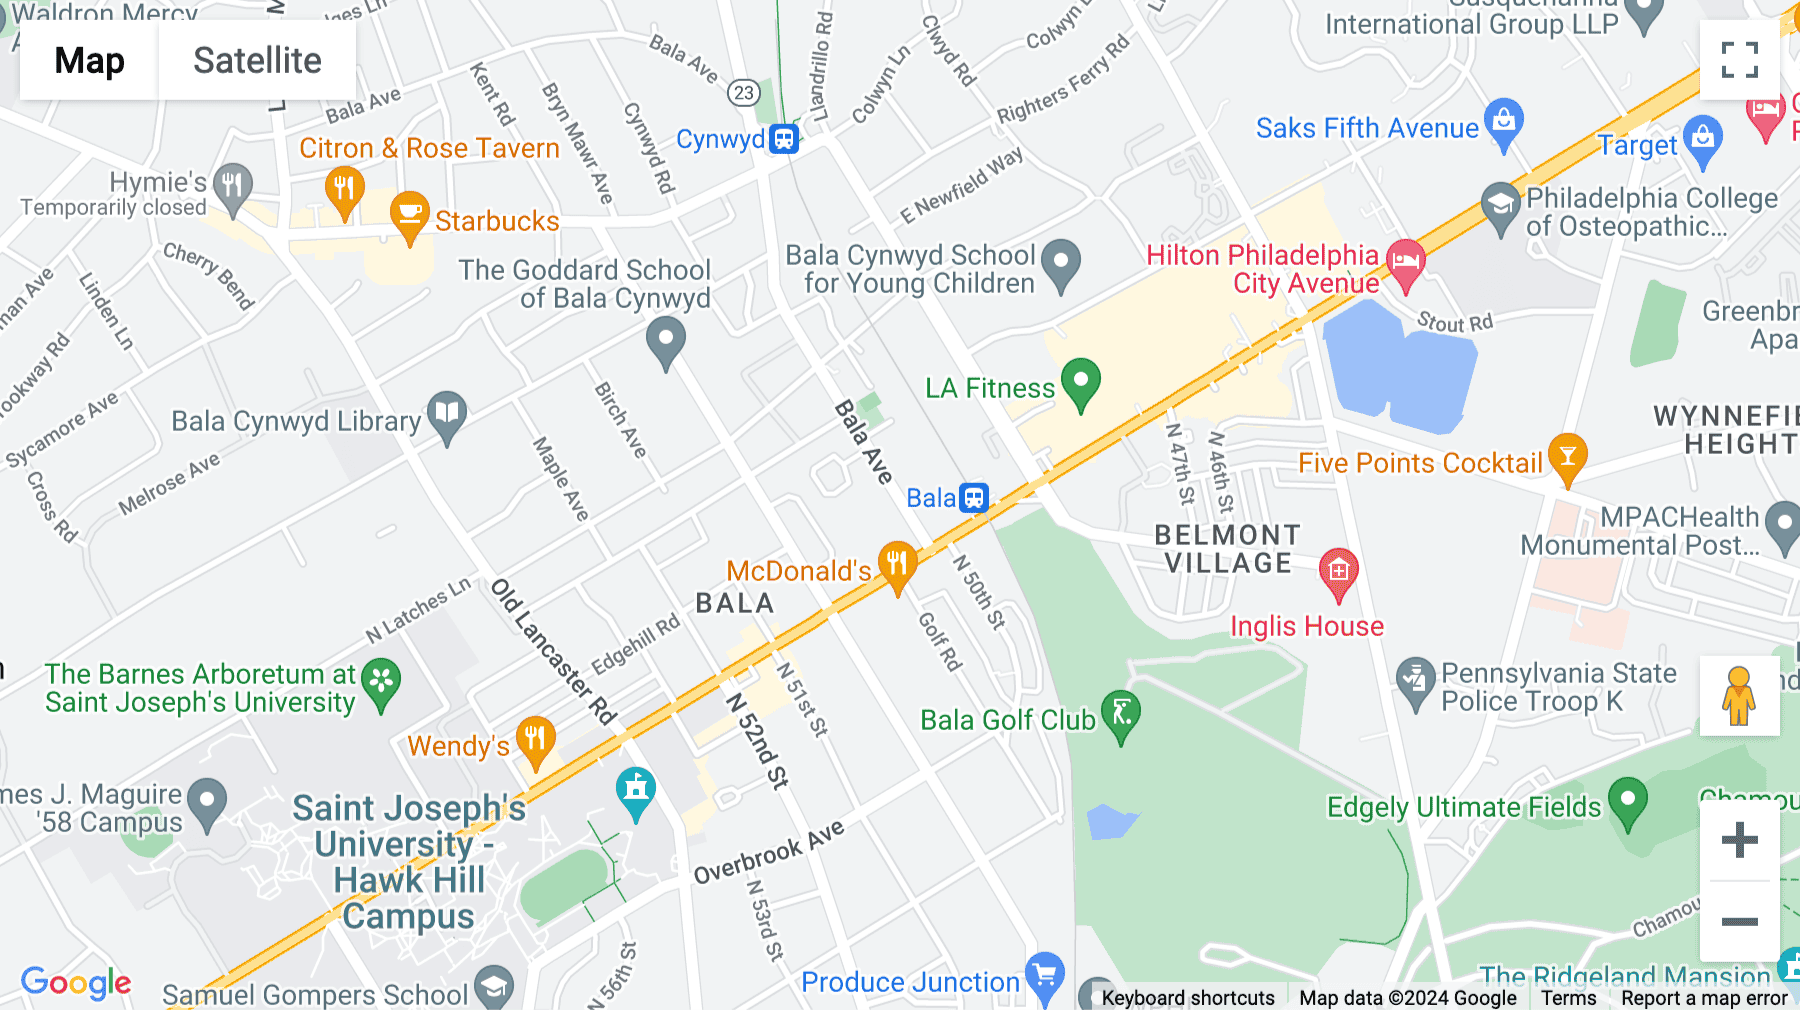 Click for interative map of 2 Bala Plaza, Suite 300, Bala Cynwyd